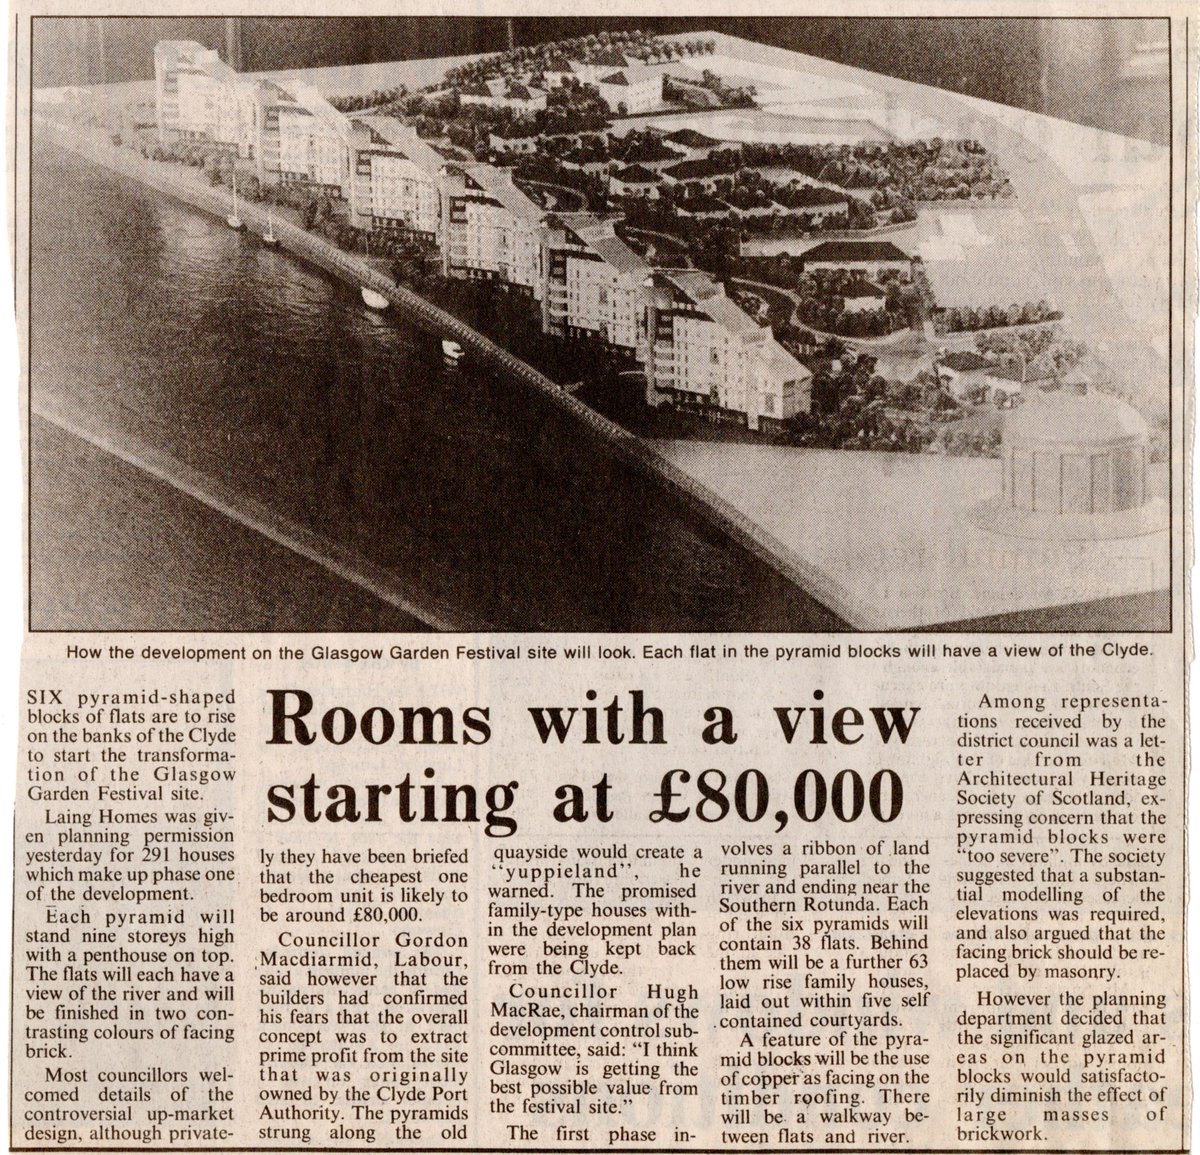 After the Garden Festival: a preview of what will become Mavisbank Gardens (AKA 'yuppieland' of 'controversial upmarket designs'). Herald Oct 25 1989